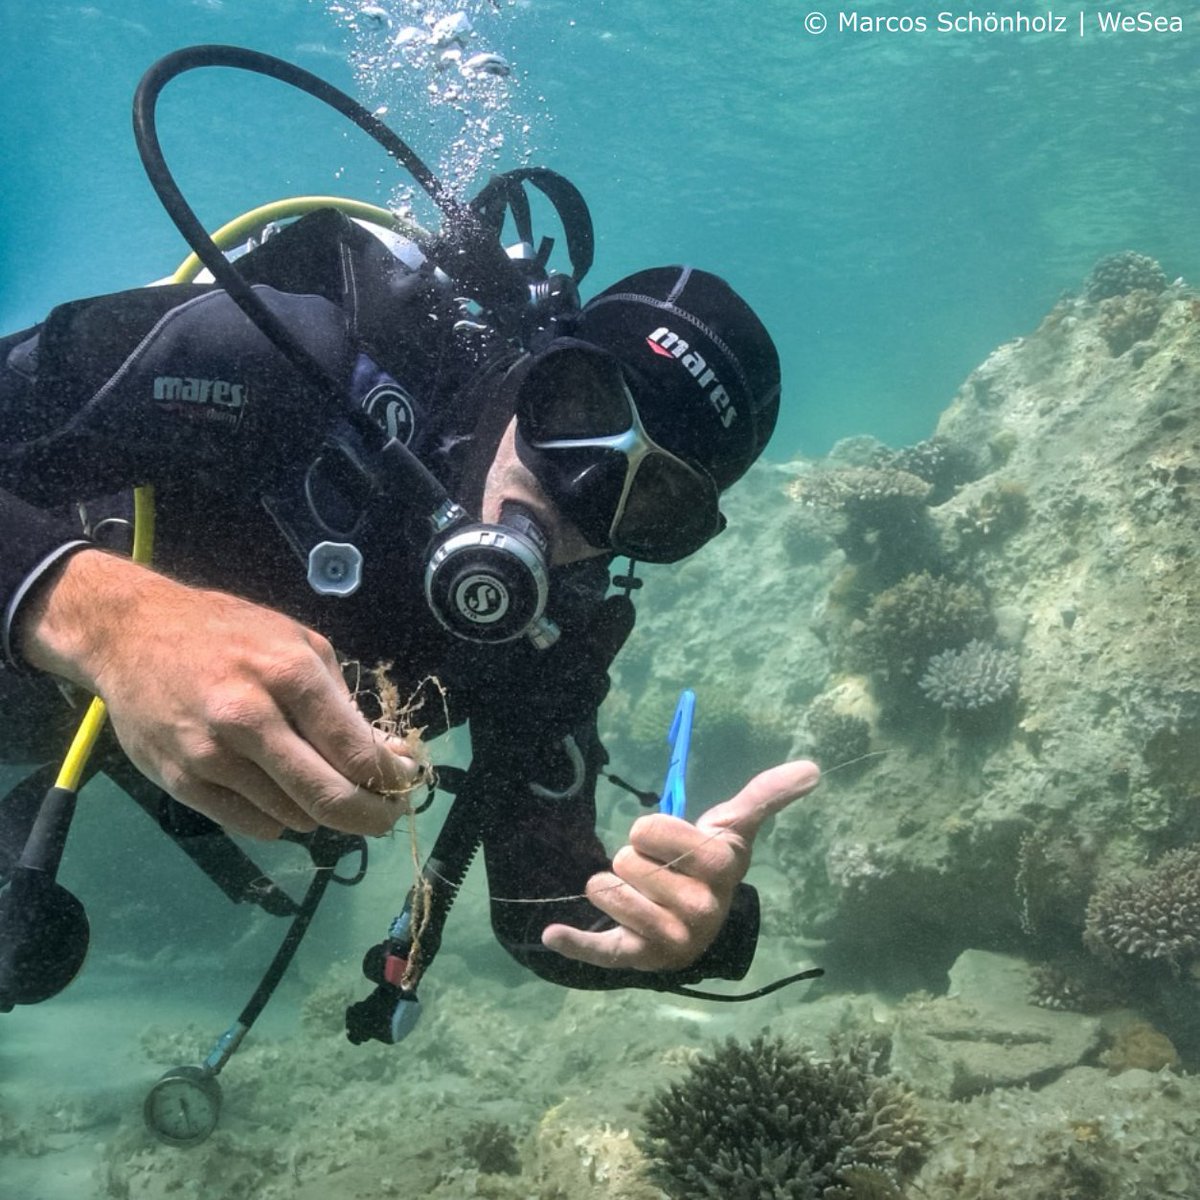 Stony #corals have #fragile skeletons and soft tissues and like many other #MarineAnimals can easily be injured when in contact with lost #FishingGear

The WeSea #diving team is always ready to remove these harmful fishing lines from the #MarineEnvironment 🤿🪸

#WeSea #GhostNets